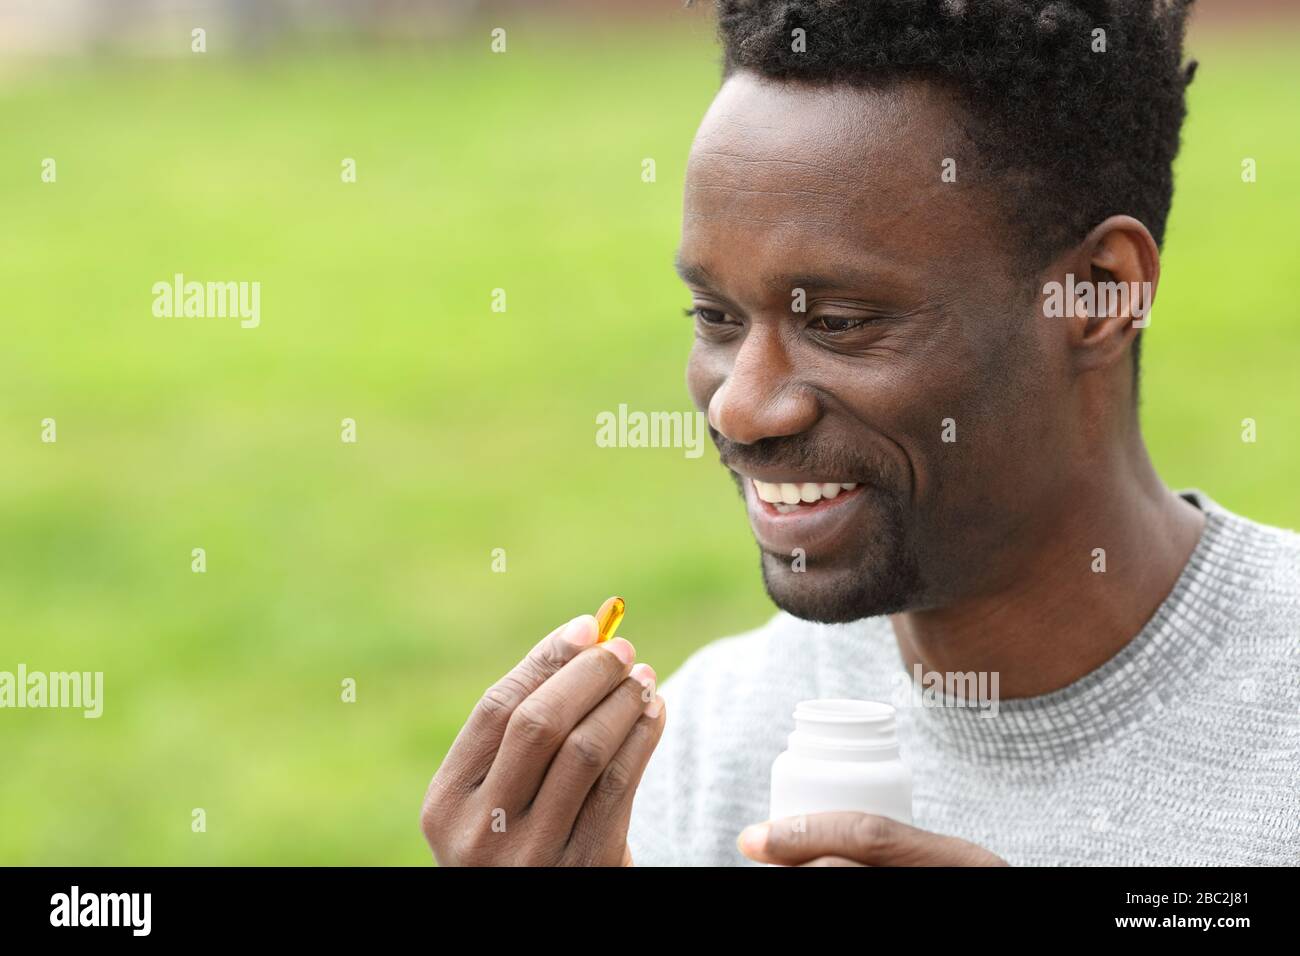 Portrait of a happy black man taking vitamin omega3 pill in the park Stock Photo